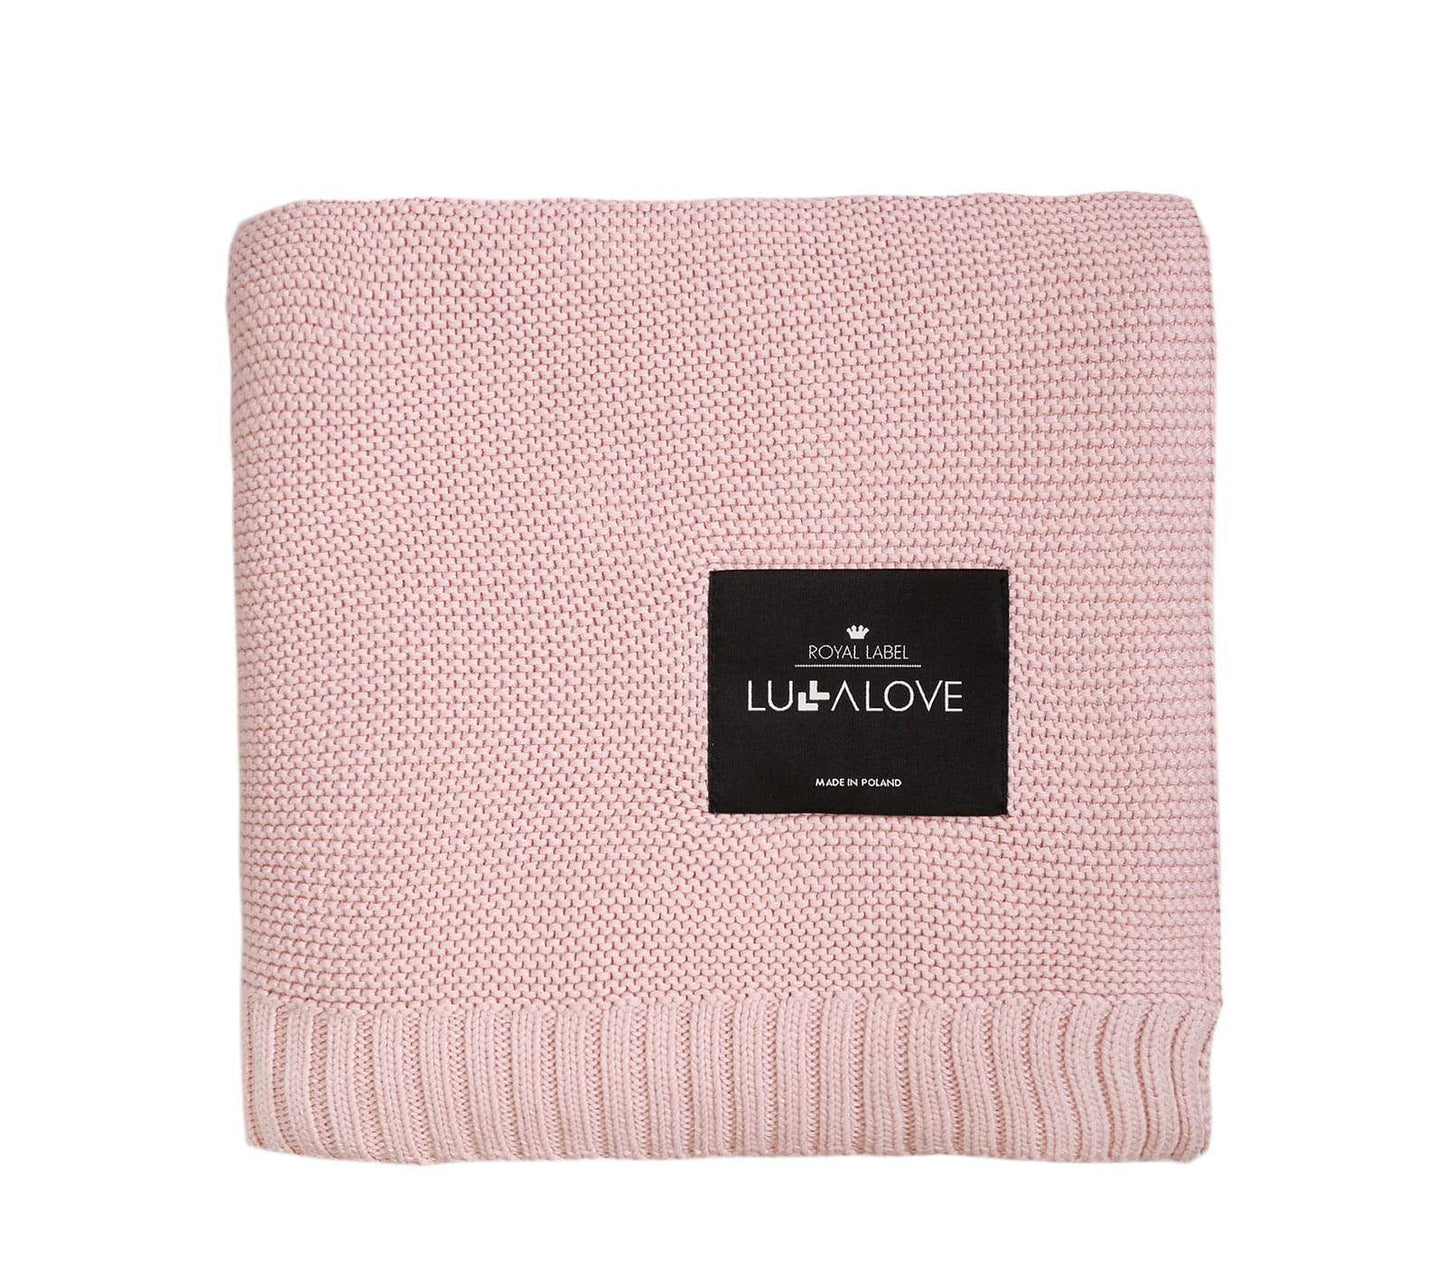 Bamboo baby blanket - Powder pink - Classic knit